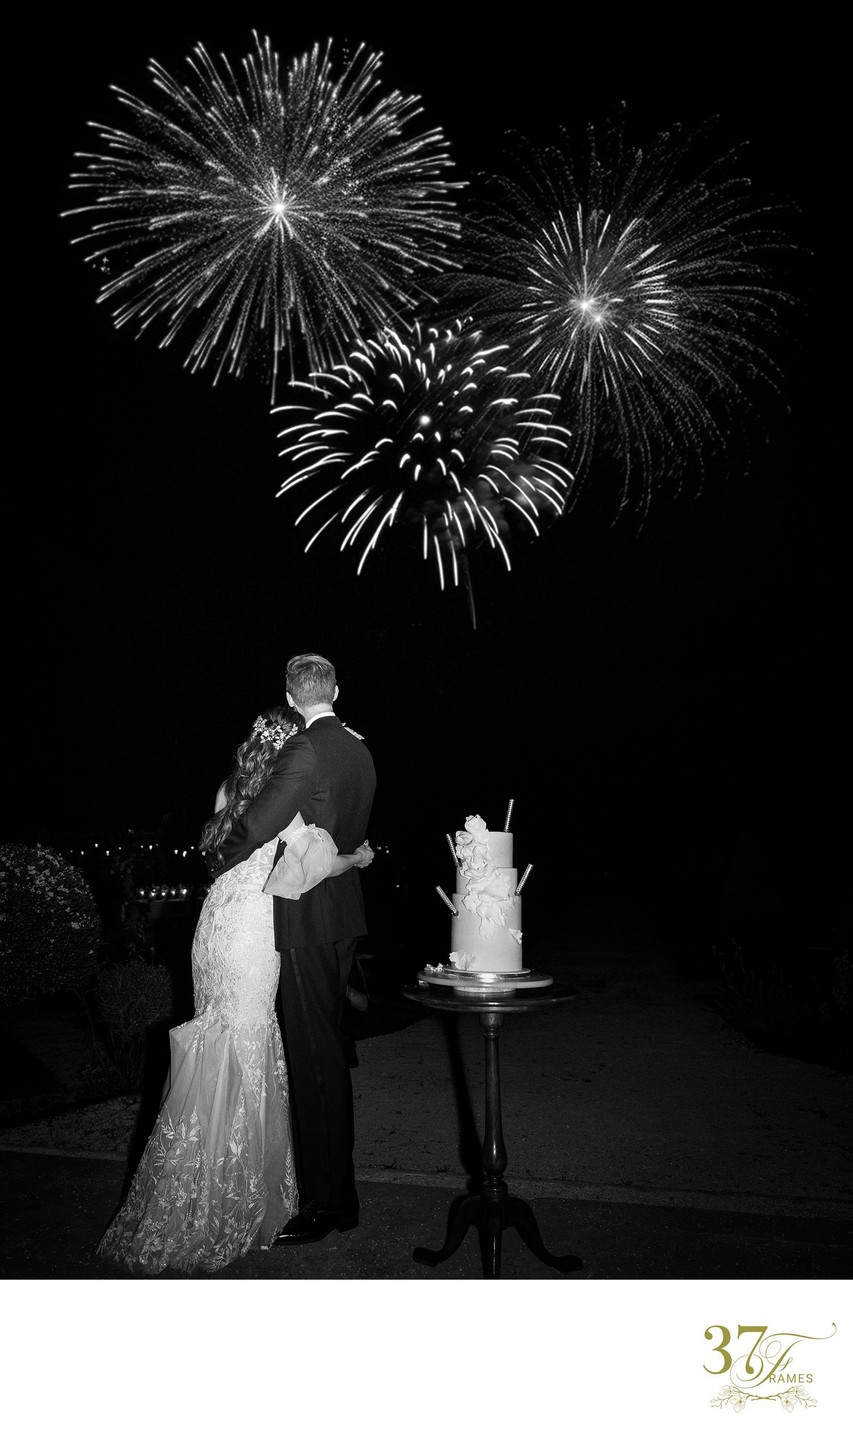 A Night to Remember: Fireworks at Château Wedding